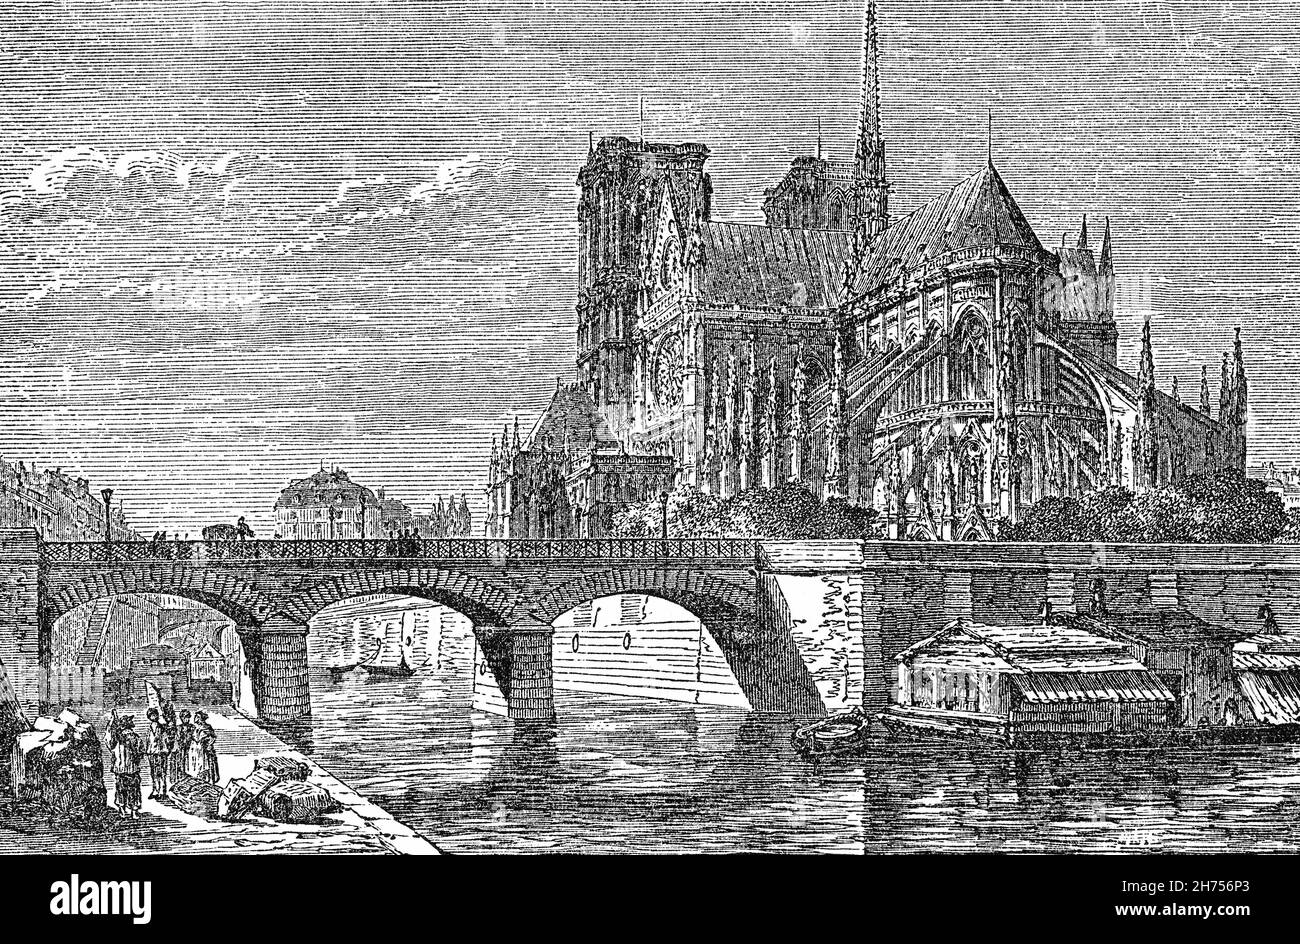 A late 19th Century illustration of Notre-Dame de Paris aka 'Our Lady of Paris', a medieval Catholic cathedral on the Île de la Cité in the 4th arrondissement of Paris. The cathedral, seen here from the Archbishop's Bridge across the Seine, was consecrated to the Virgin Mary and is considered to be one of the finest examples of French Gothic architecture. The cathedral's construction began in 1163 under Bishop Maurice de Sully and was largely complete by 1260, though it was modified frequently in the following centuries. Stock Photo